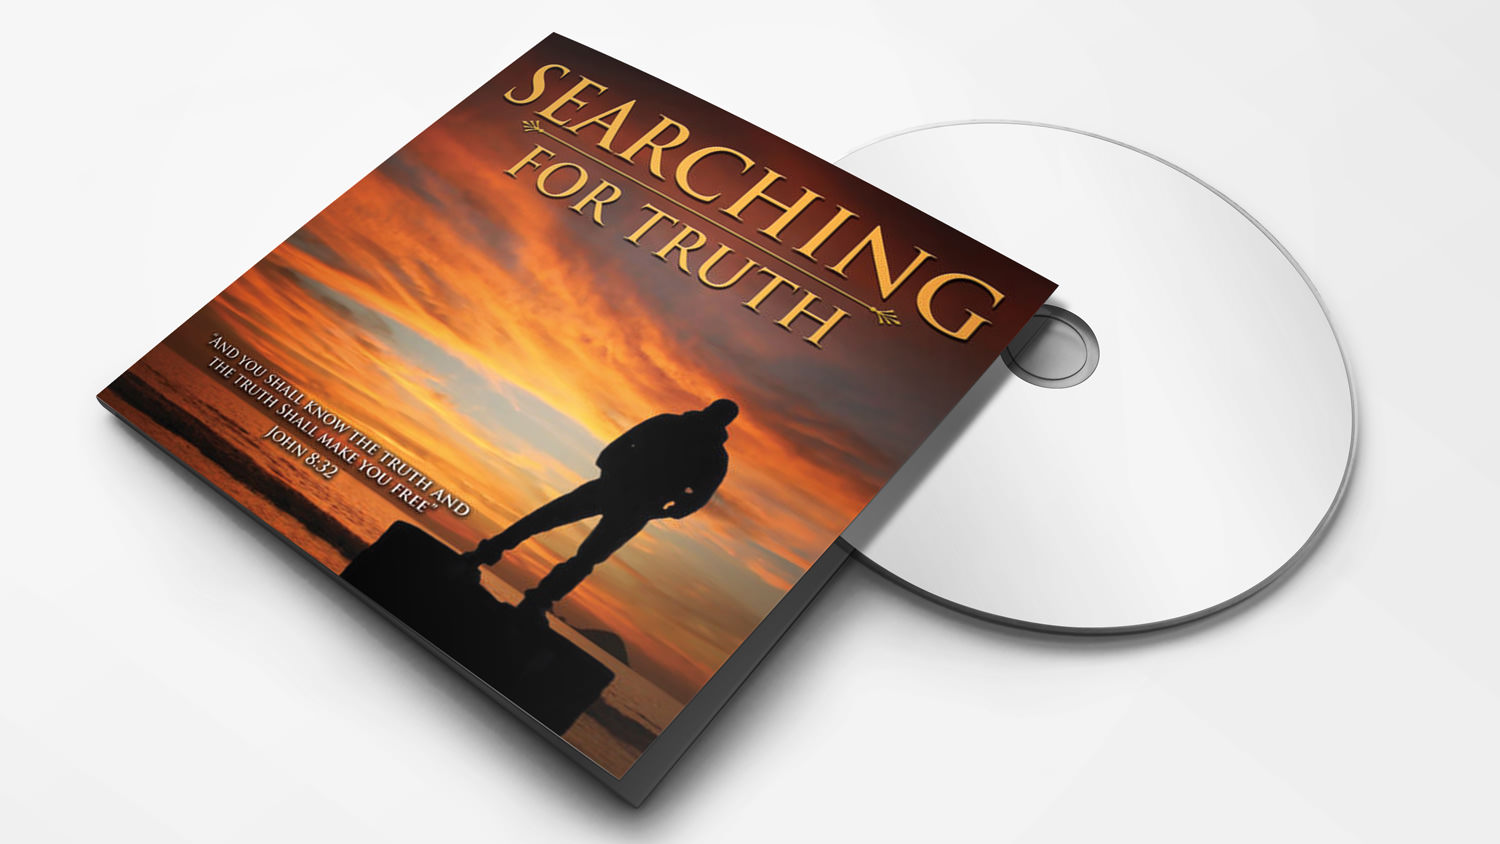 Searching for Truth DVD